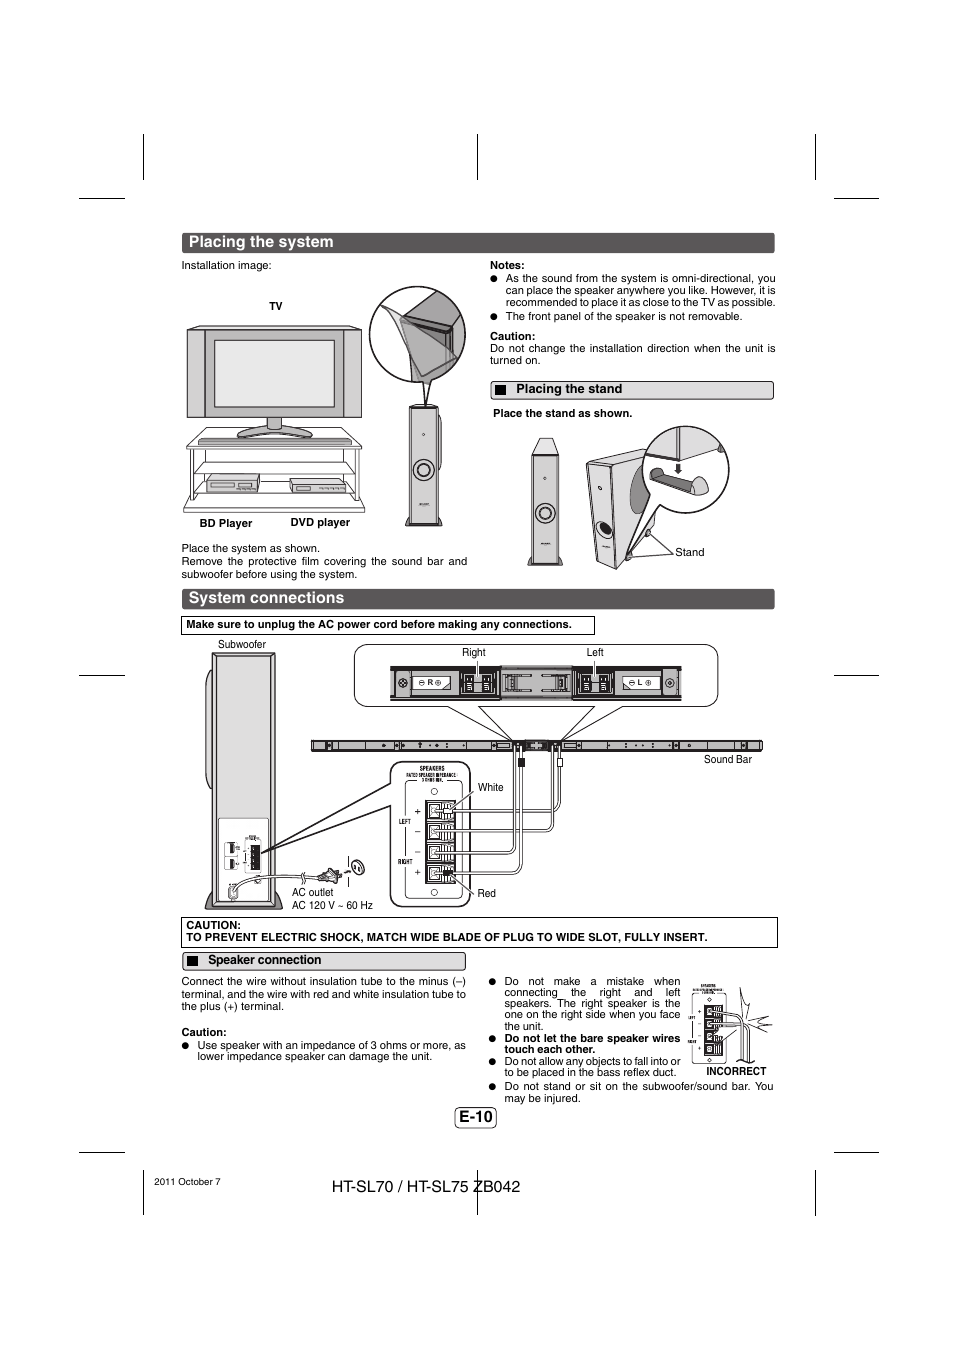 Placing the system, Placing the stand, System connections | Speaker connection, E-10 | Sharp HT-SL75 User Manual | Page 11 / 16